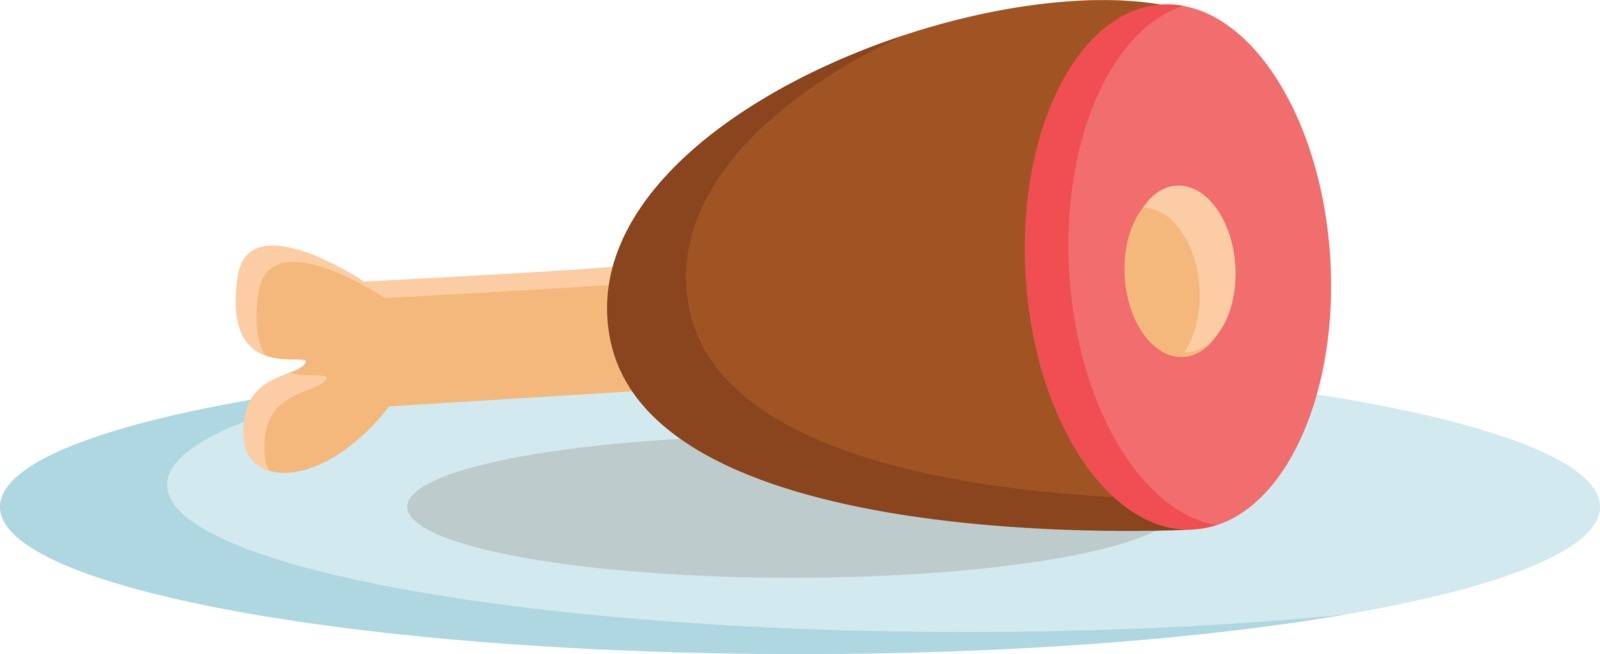 A large piece of cooked meat served on a plate vector or color i by Morphart